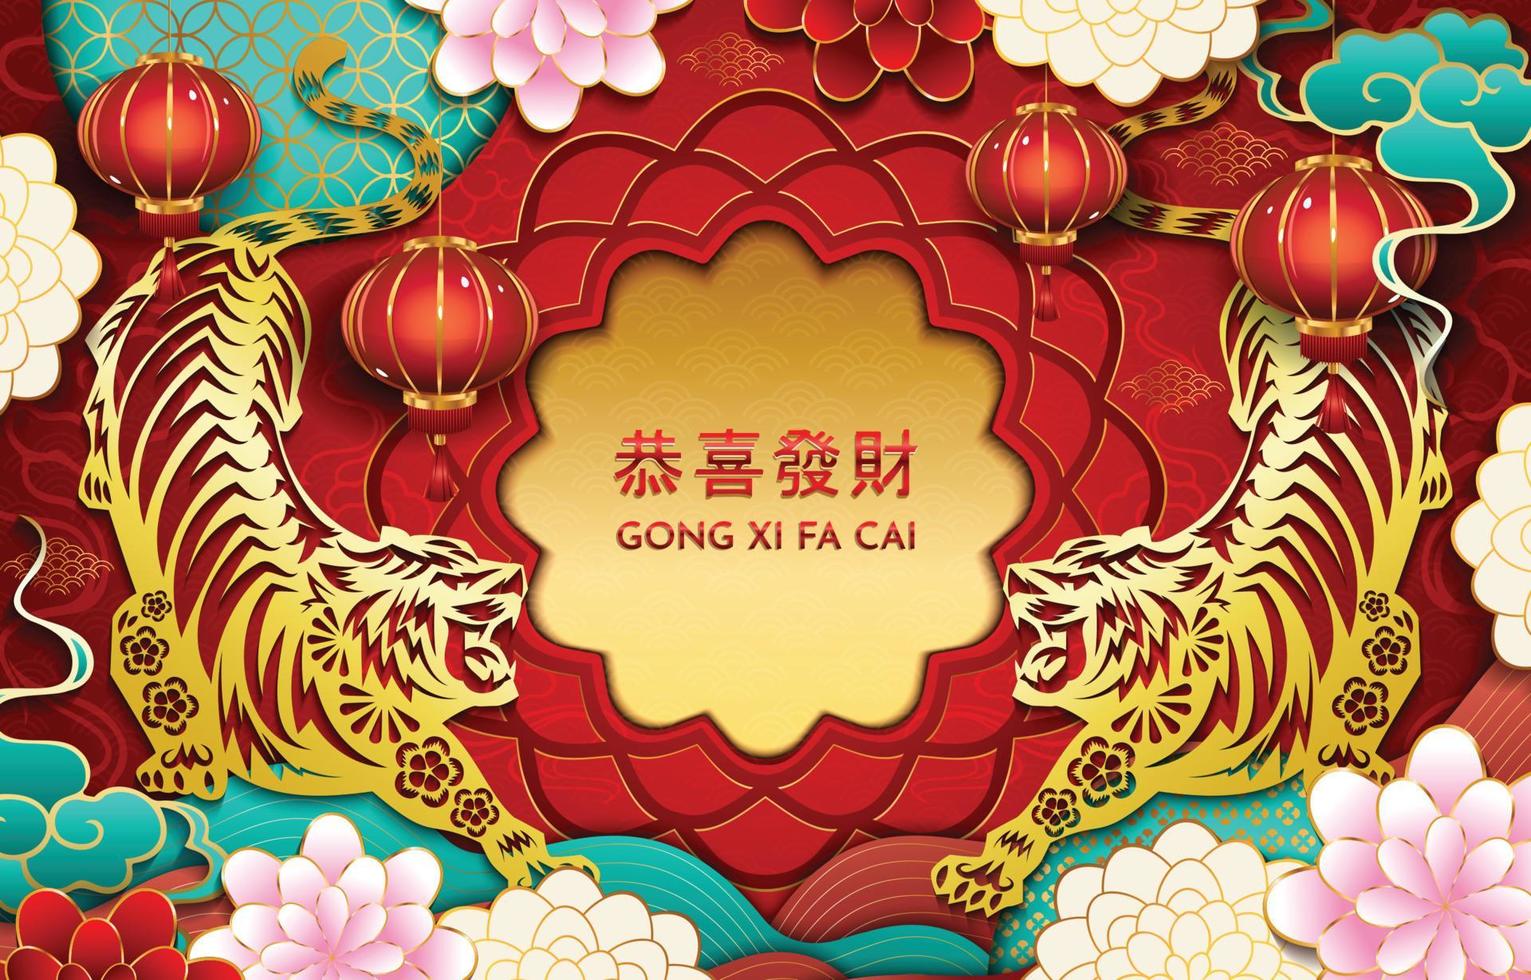 Gong Xi Fa Cai with Year Of The Tiger Background vector